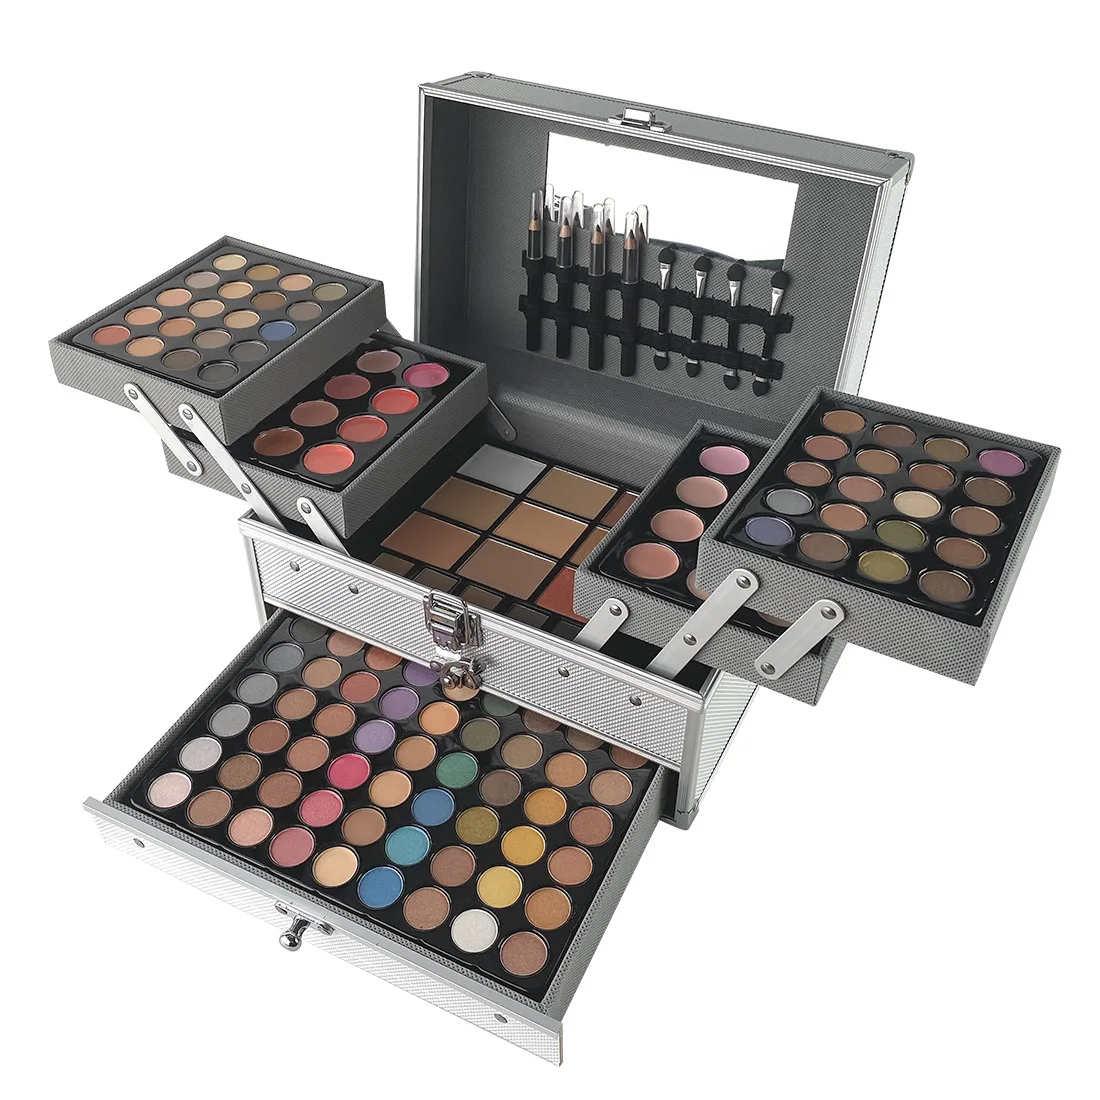 

Fashion Women Cosmetic Case Full Professional Makeup Palette Concealer Blusher Pro 132 Full Color Eyeshadow Palette